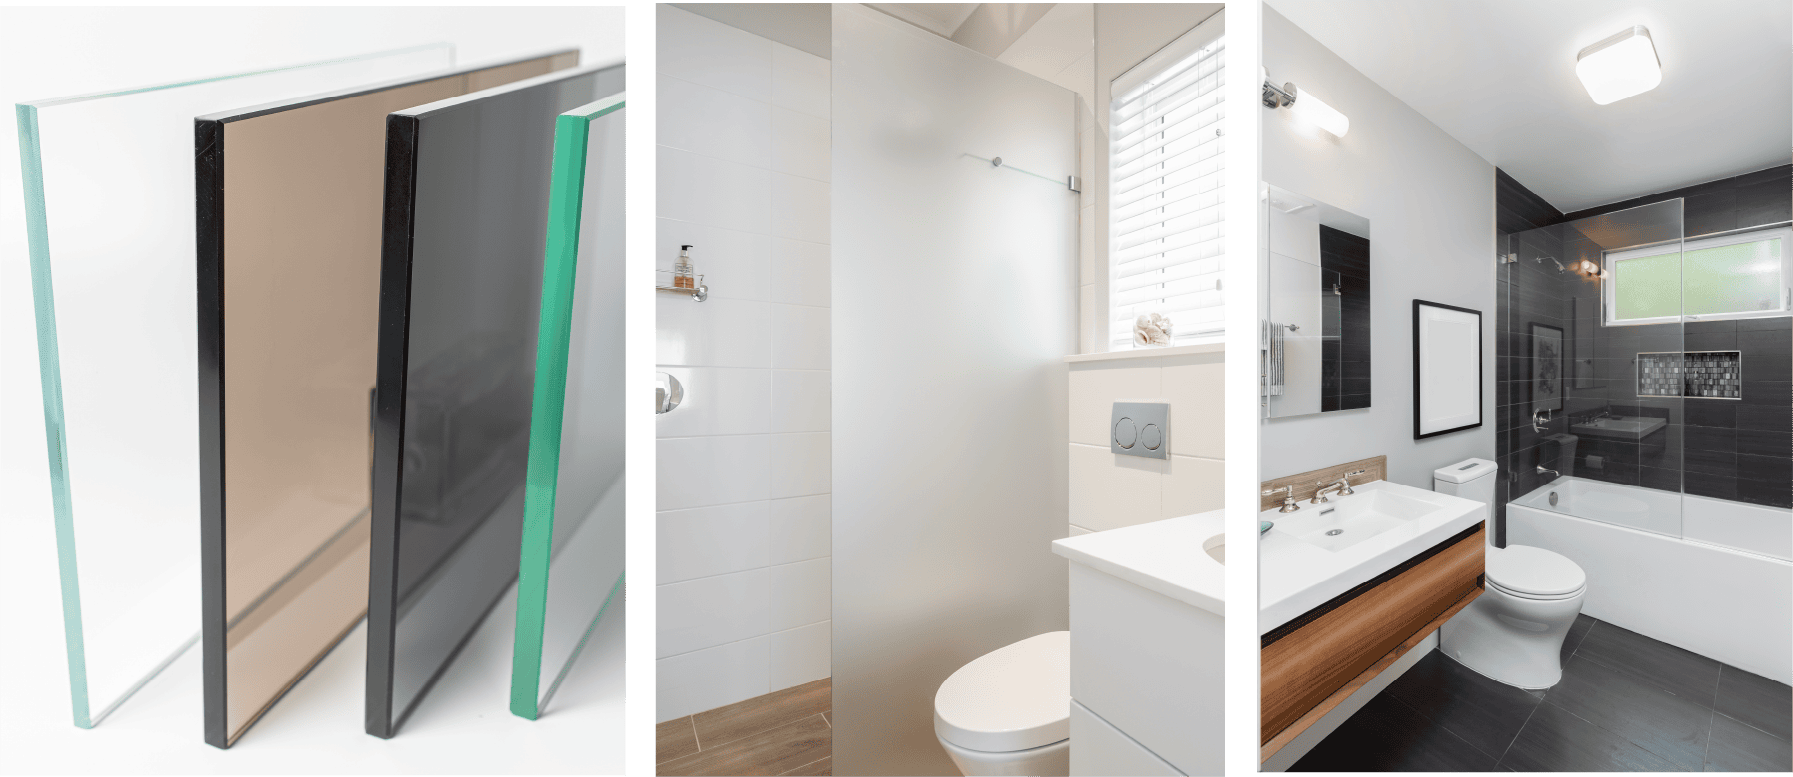 Three images: different glass types, a frosted glass shower door, and a bathtub with a clear glass panel